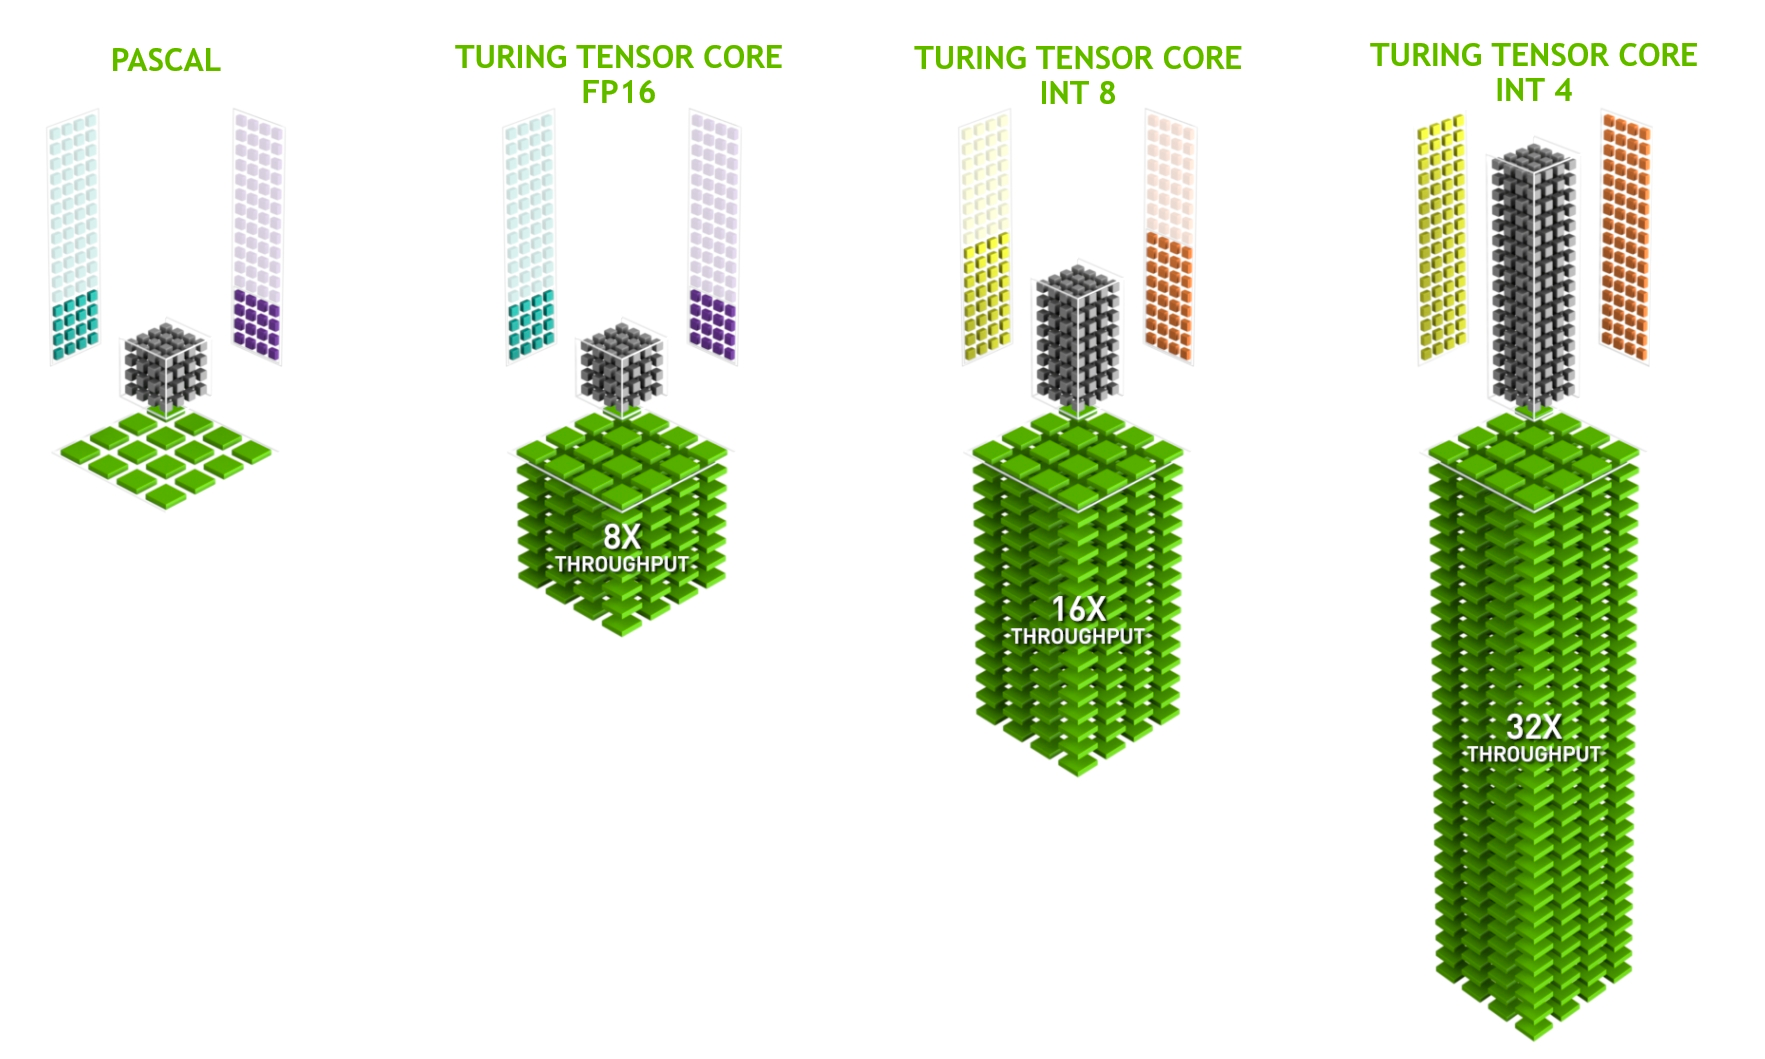 Image of NVIDIA Pascal and NVIDIA Turing architectures.